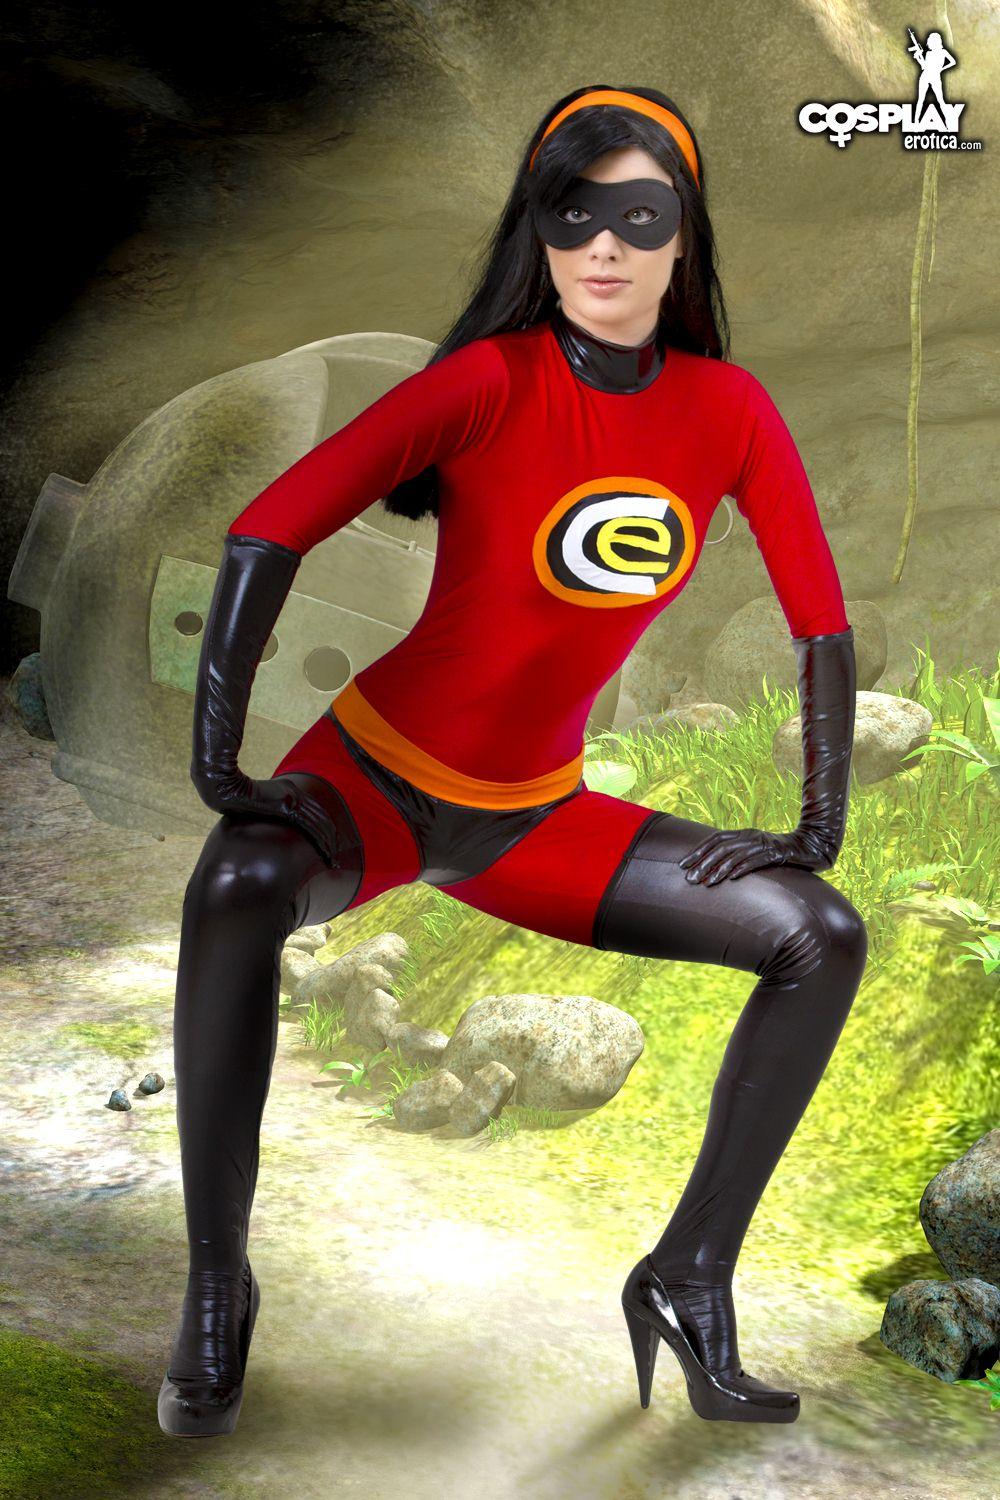 Pictures of cosplayer Marylin dressed as Violet from The Incredibles #59427701